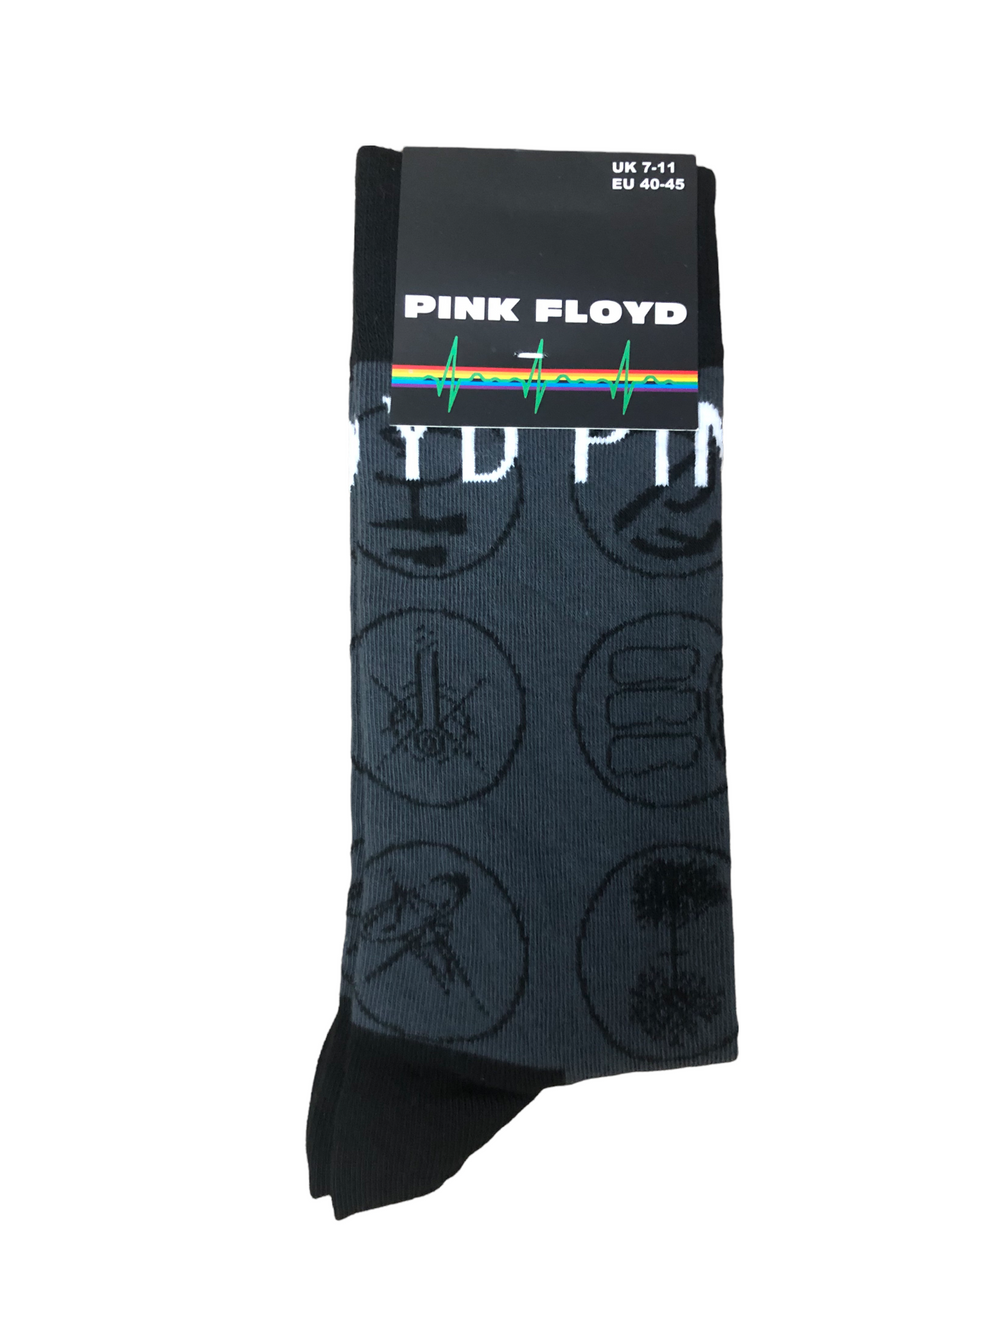 Pink Floyd Later Years Official Product 1 Pair Jacquard Socks Brand New